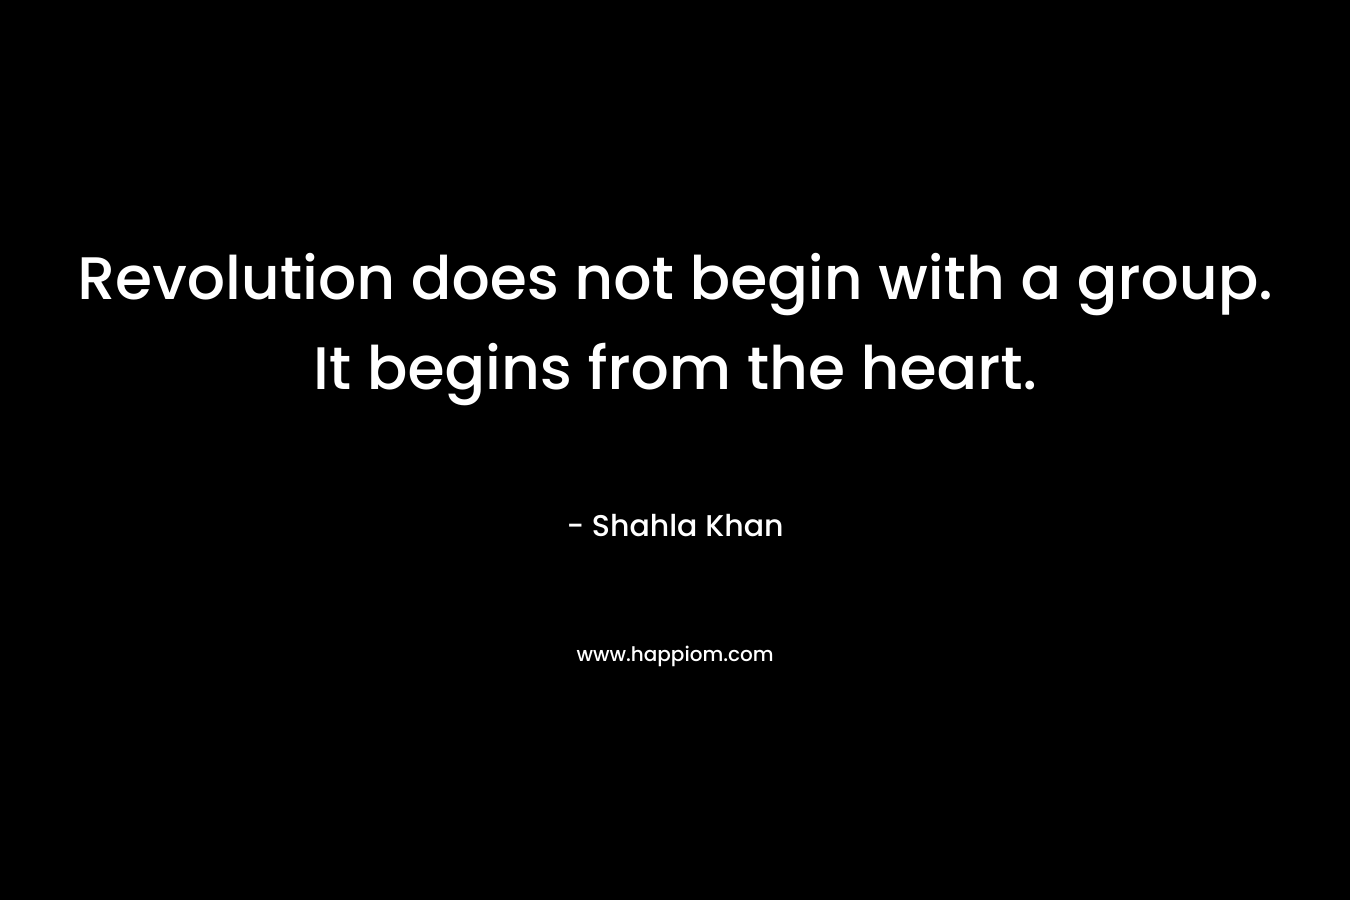 Revolution does not begin with a group. It begins from the heart.